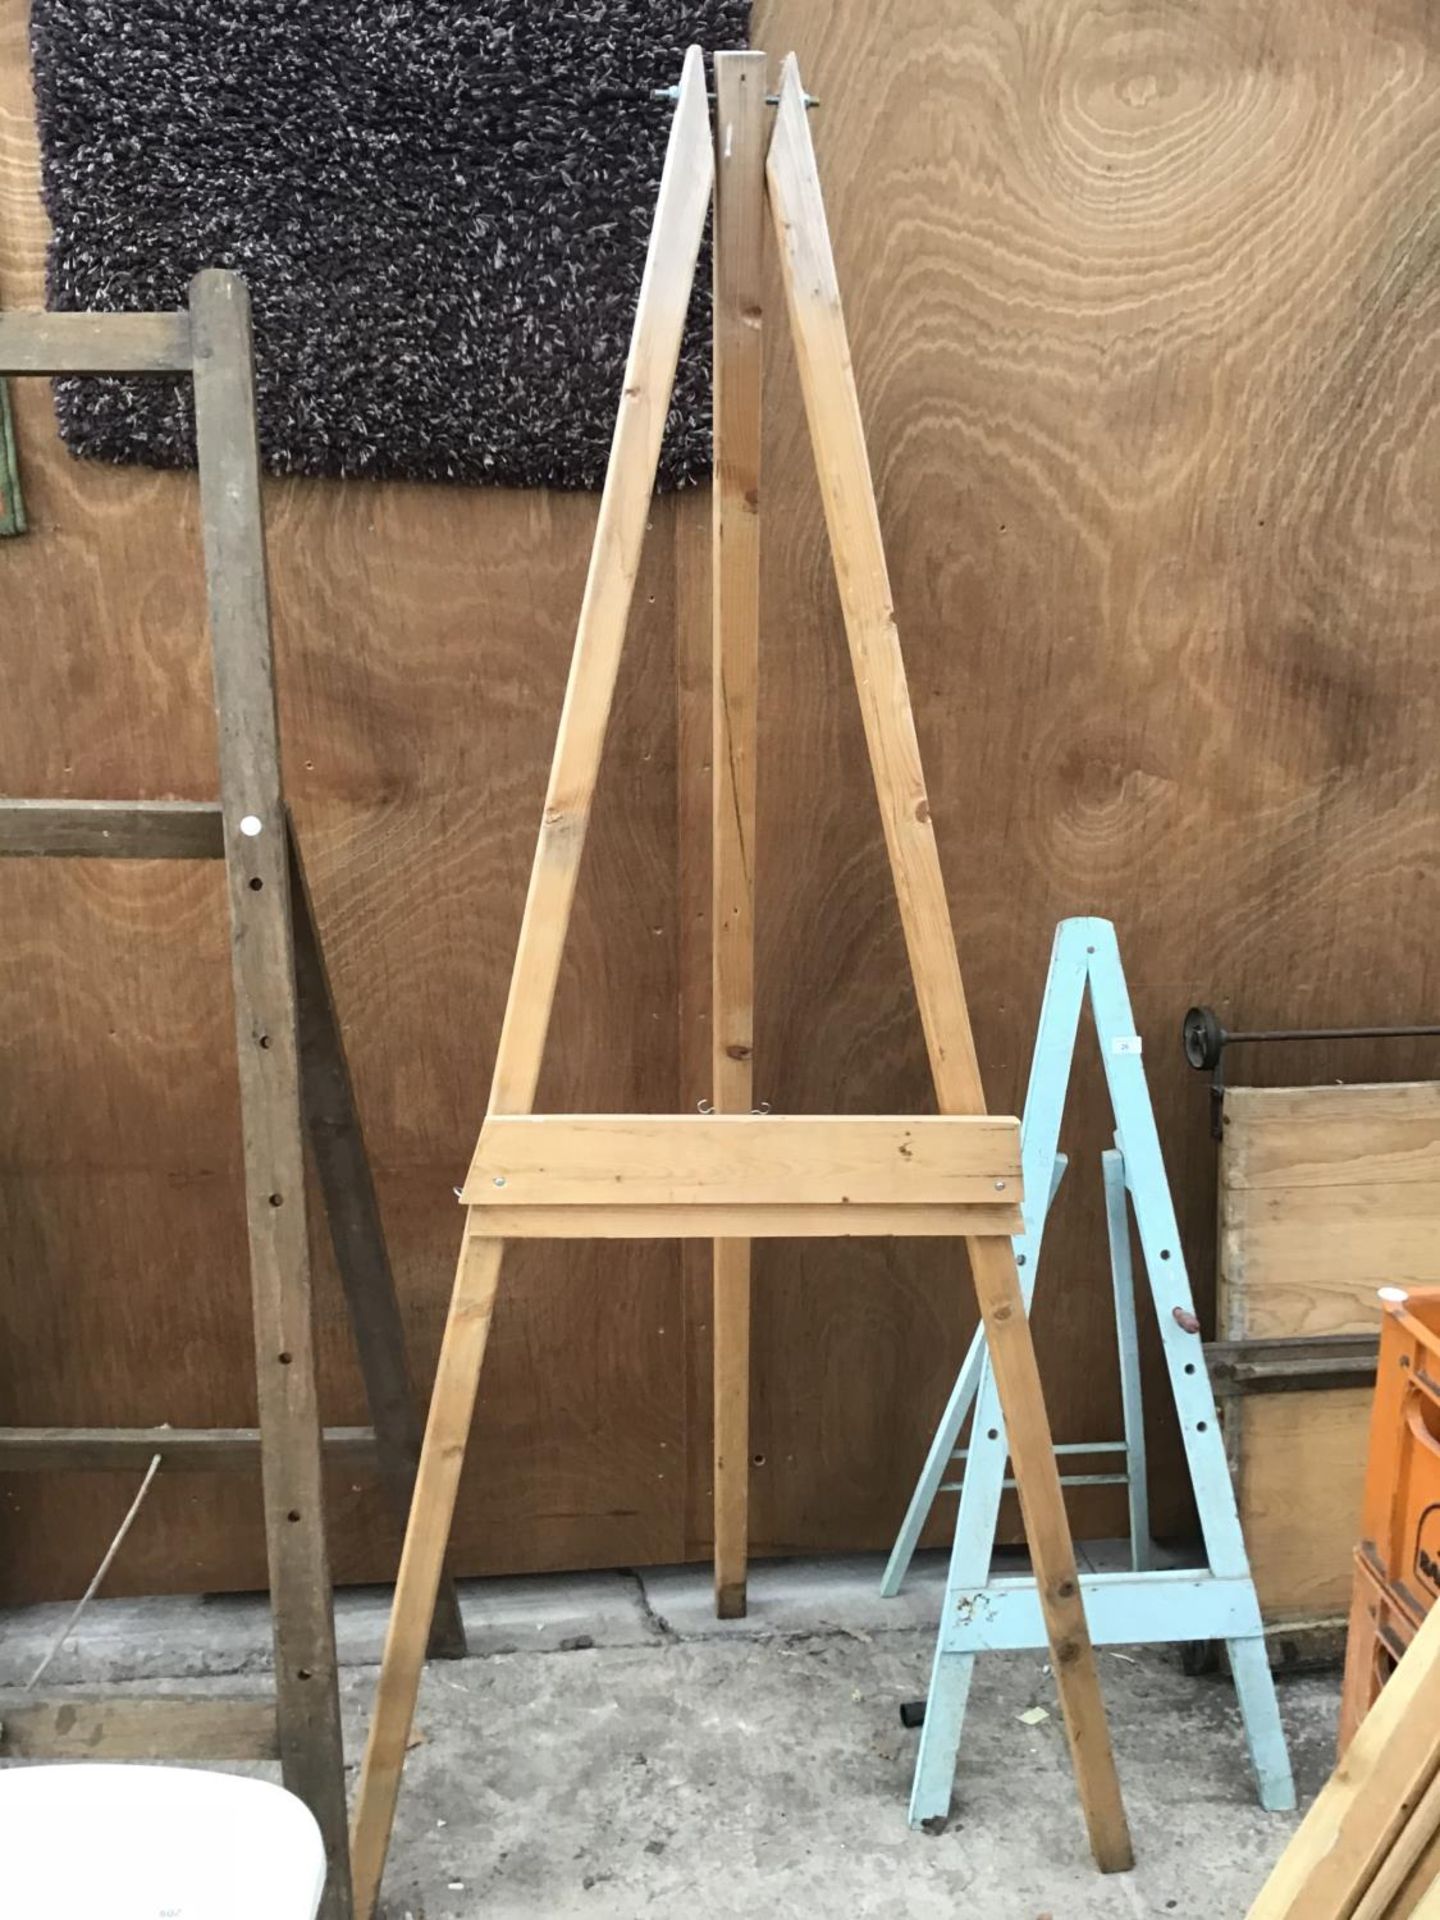 THREE VINTAGE FREESTANDING WOODEN EASELS OF VARIOUS SIZES - Image 3 of 4